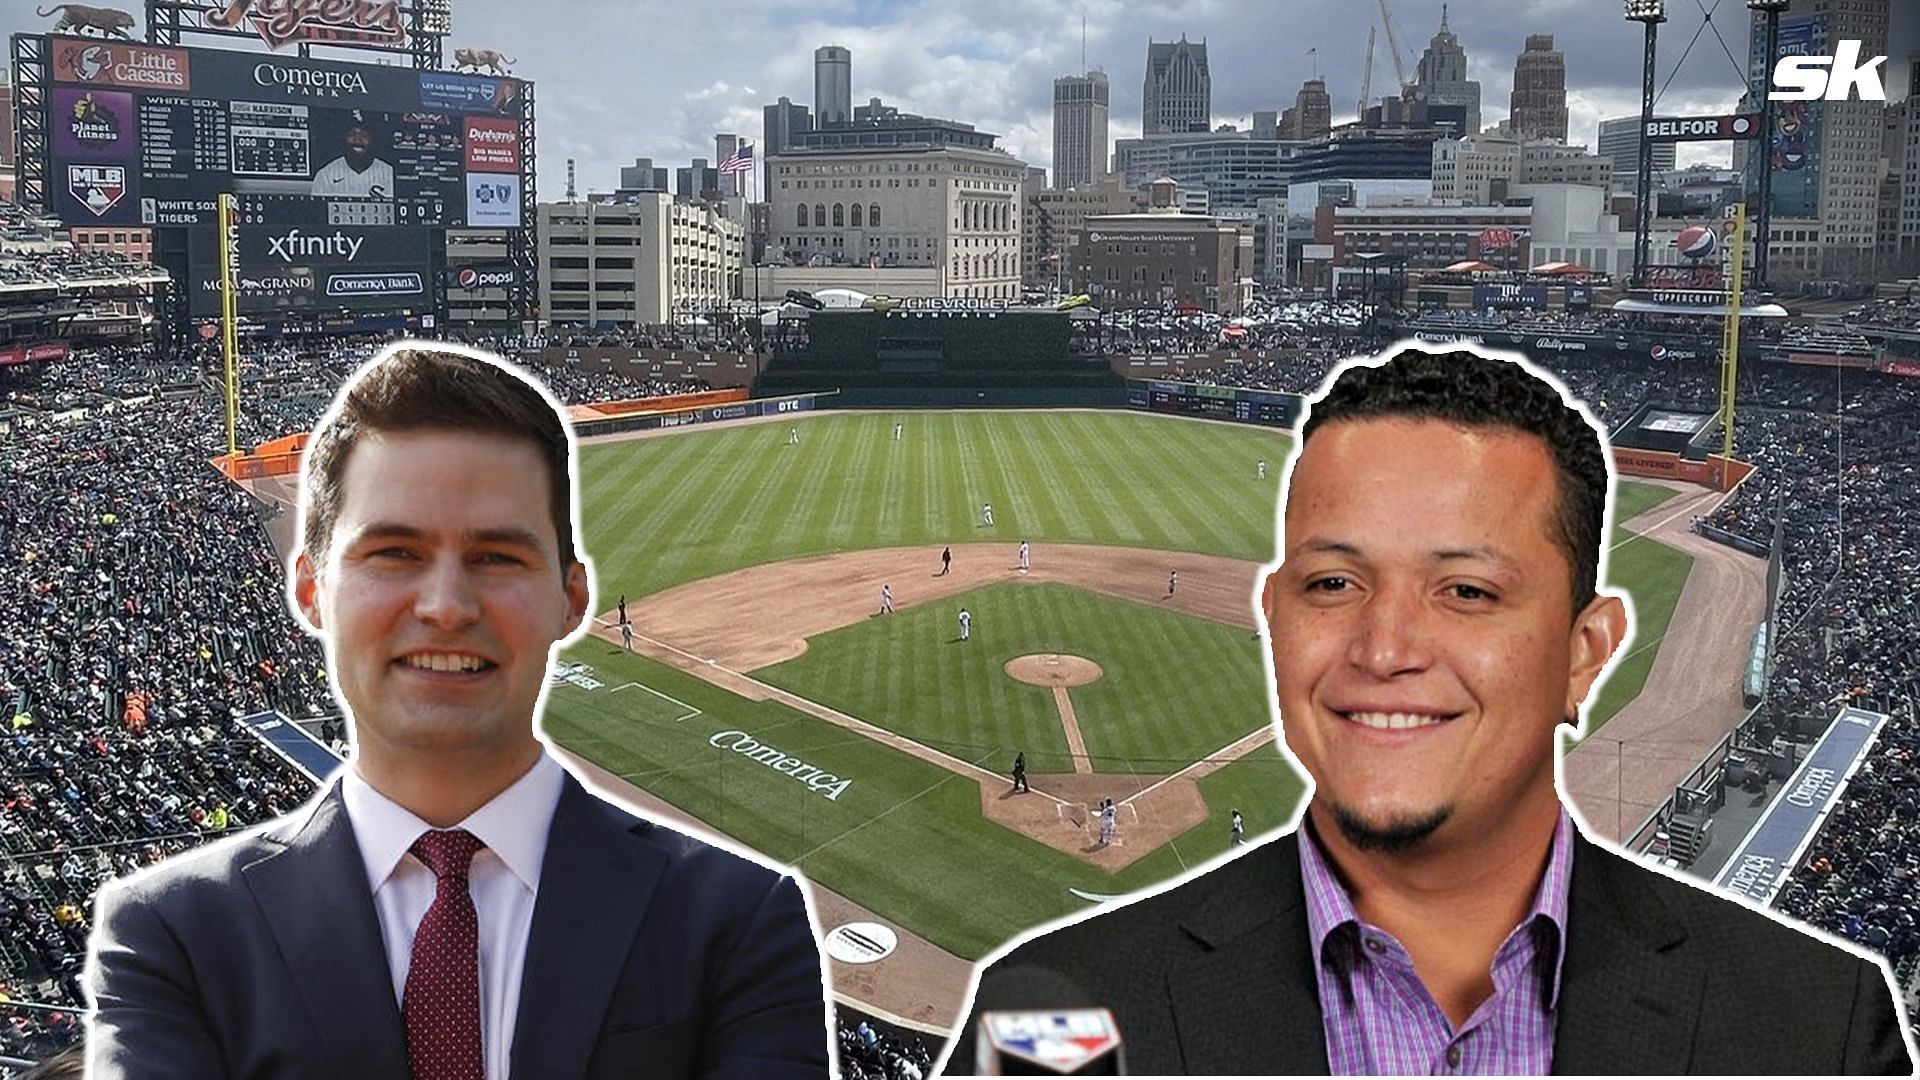 The Detroit Tigers announced that Miguel Cabrera will become Special Assistant to the President of Baseball Operations after he retires